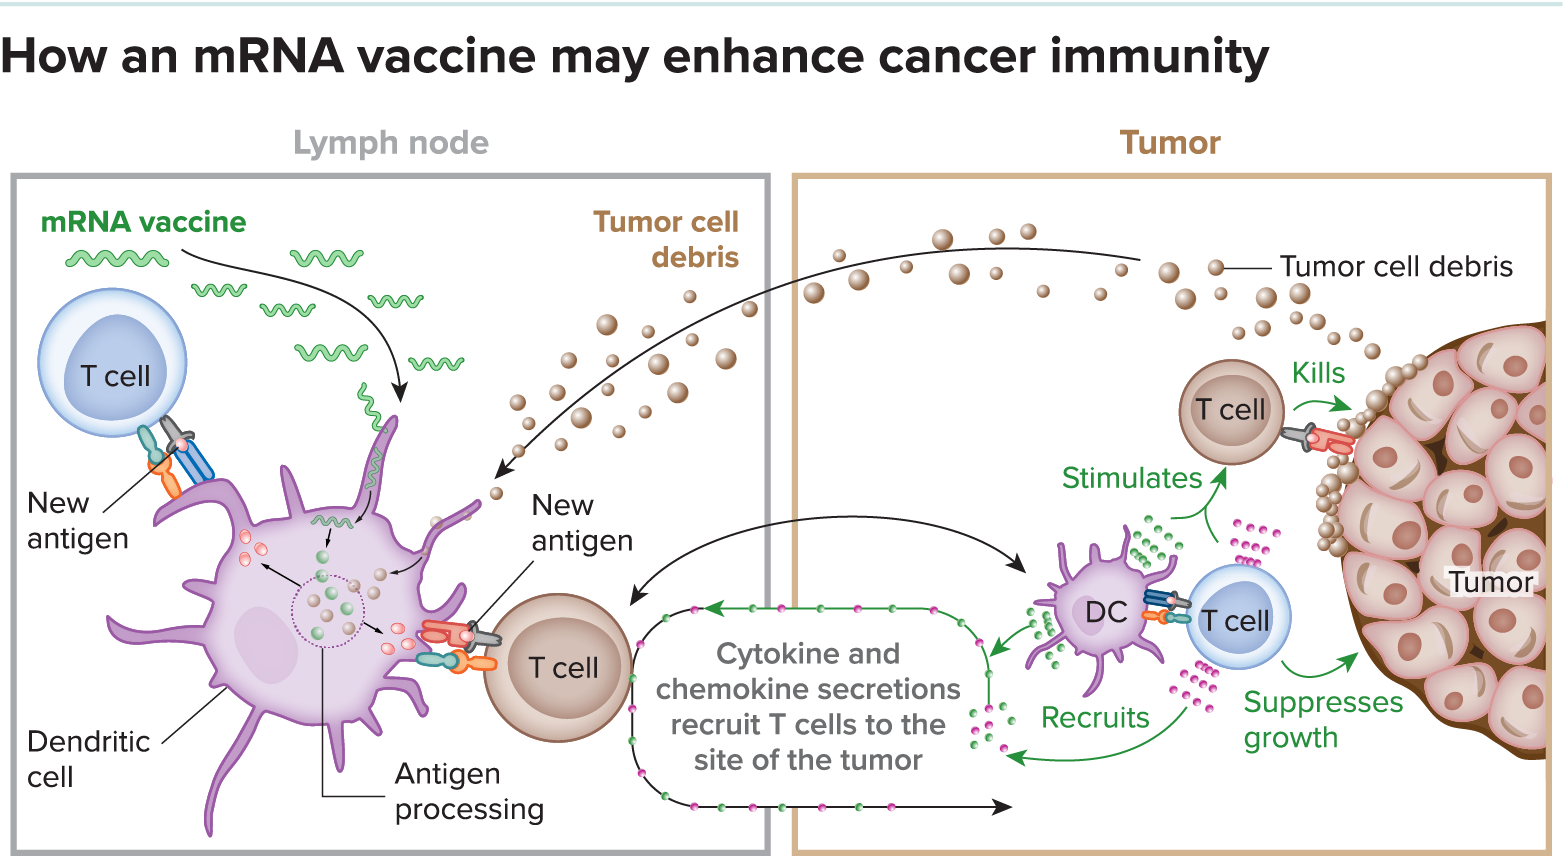 Graphic depicting how an mRNA vaccine may enhance cancer immunity.